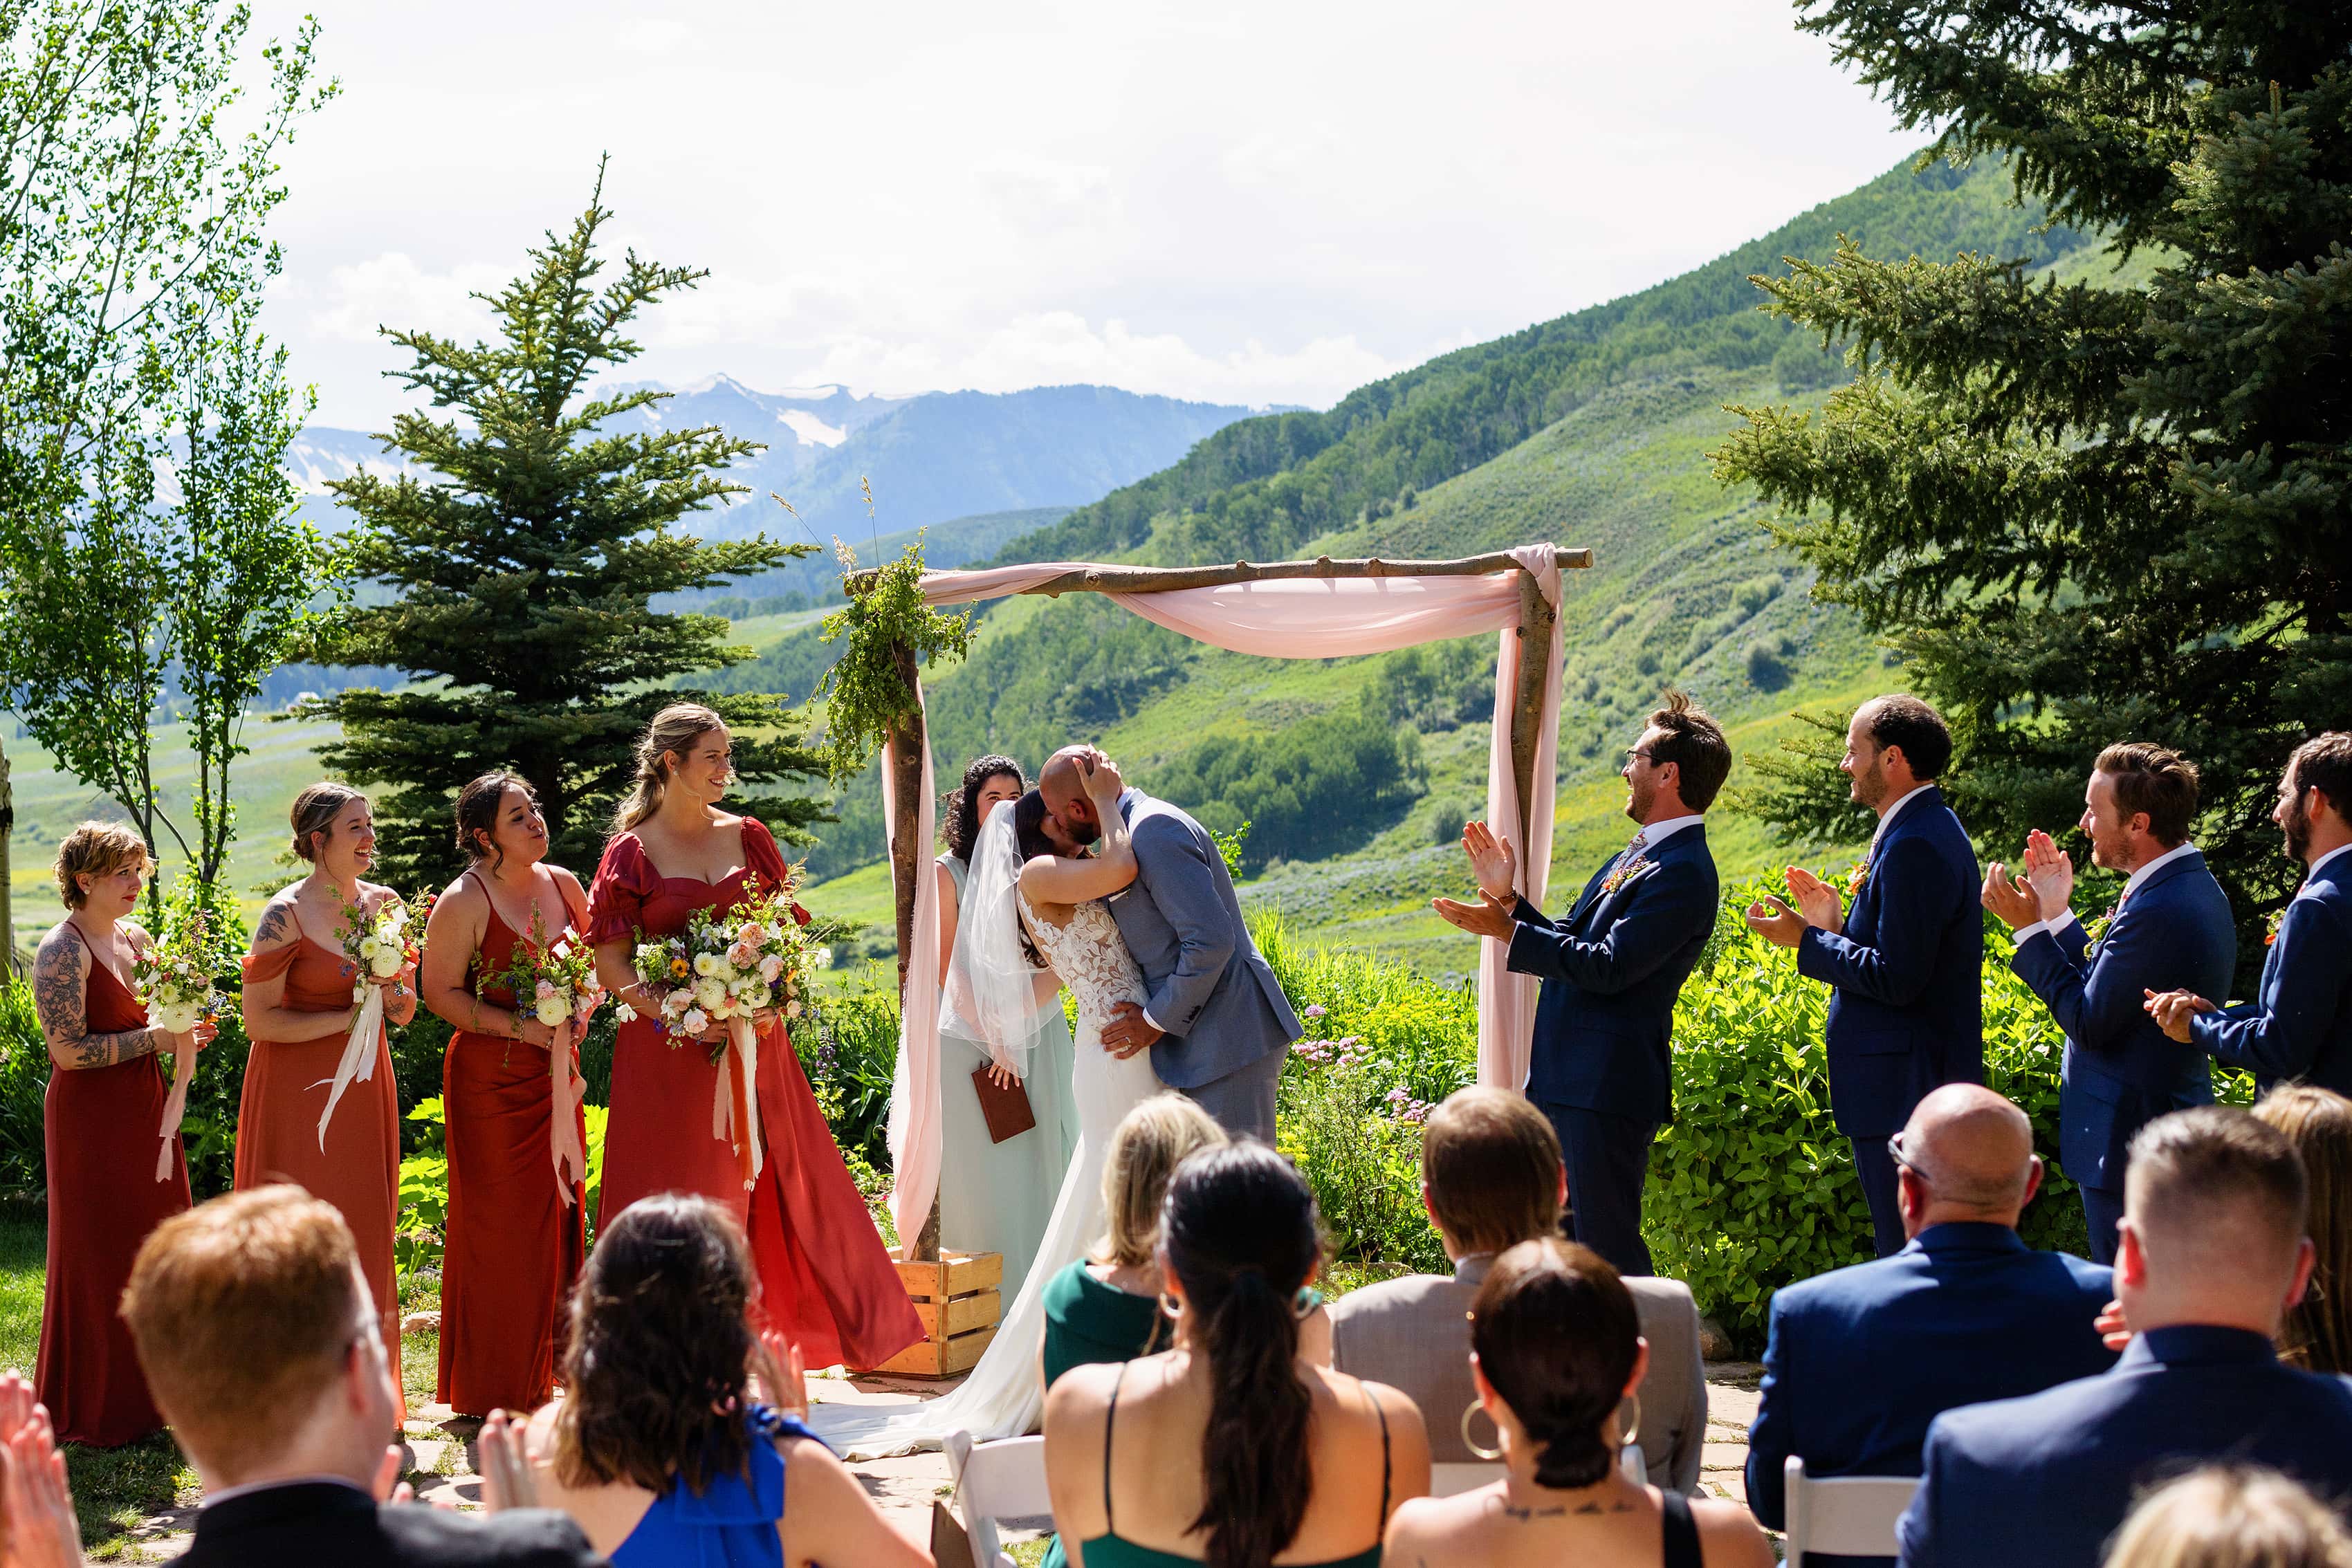 The newlyweds share their first kiss during their Mountain Wedding Garden ceremony in Crested Butte